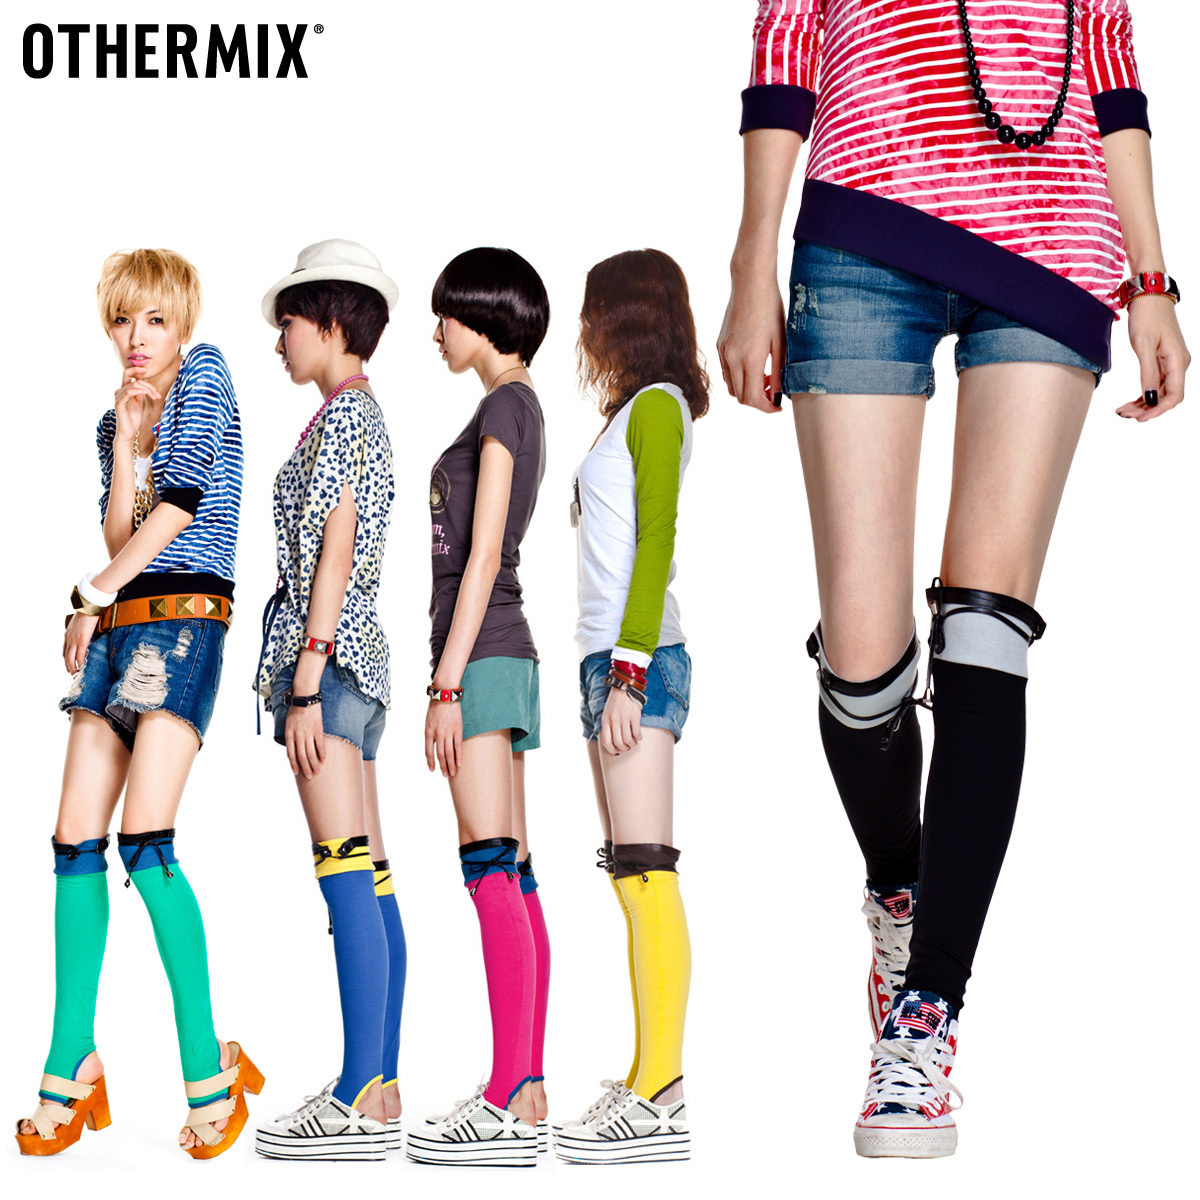 Othermix solid color block decoration drawstring step on the foot ankle sock chromophous 12y30001